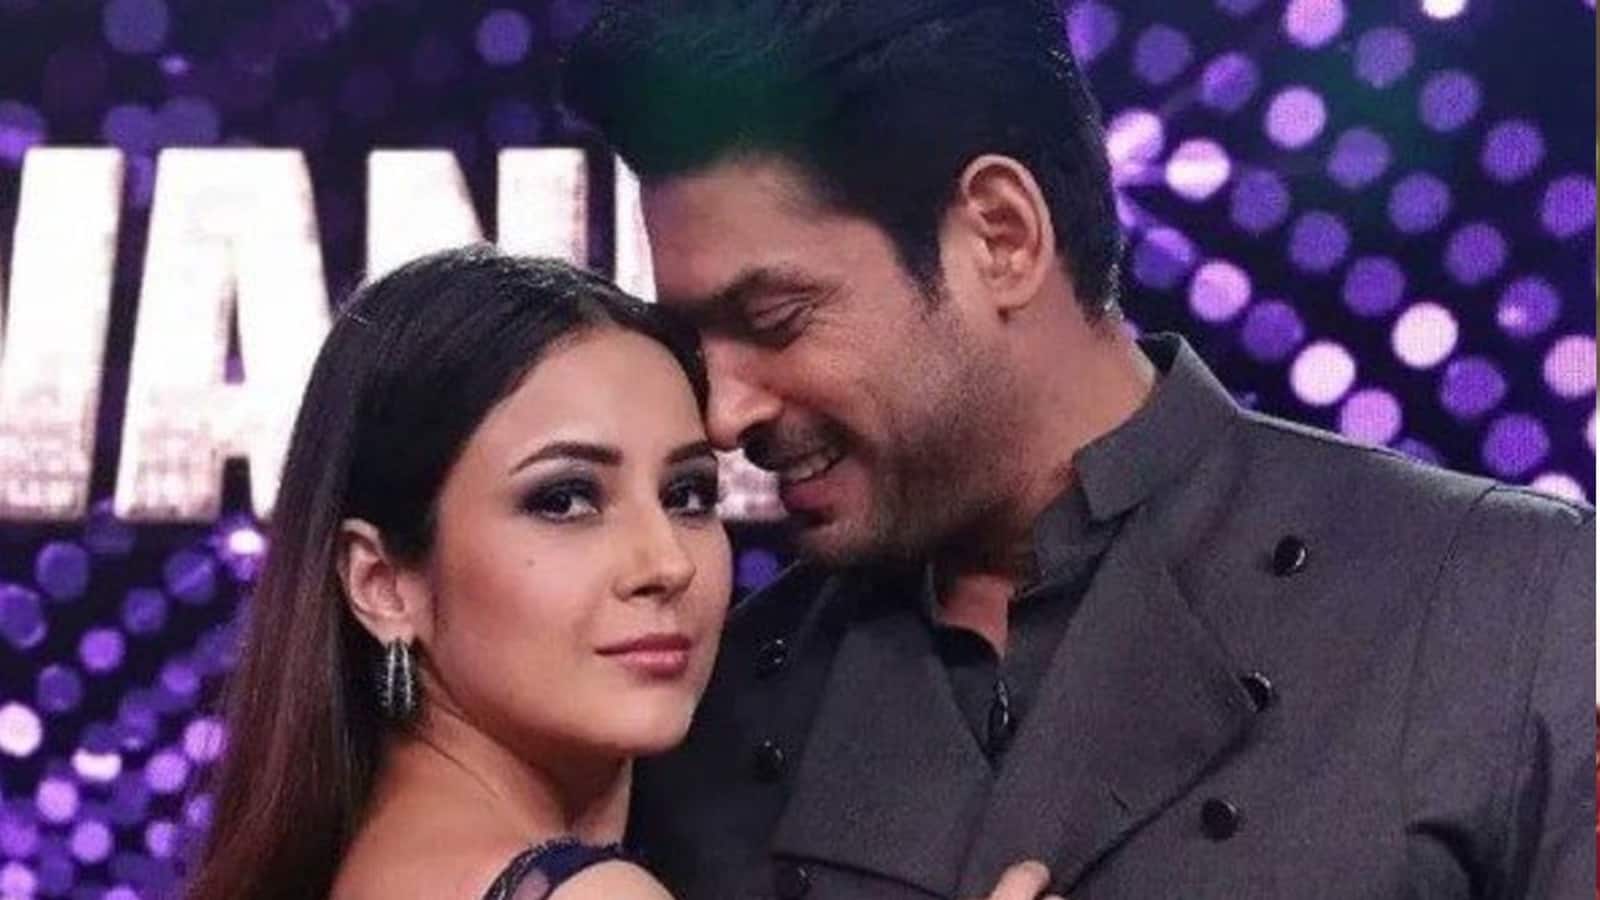 Heartbreaking! Shehnaaz Gill recounts how Sidharth Shukla's demise took away her will to live